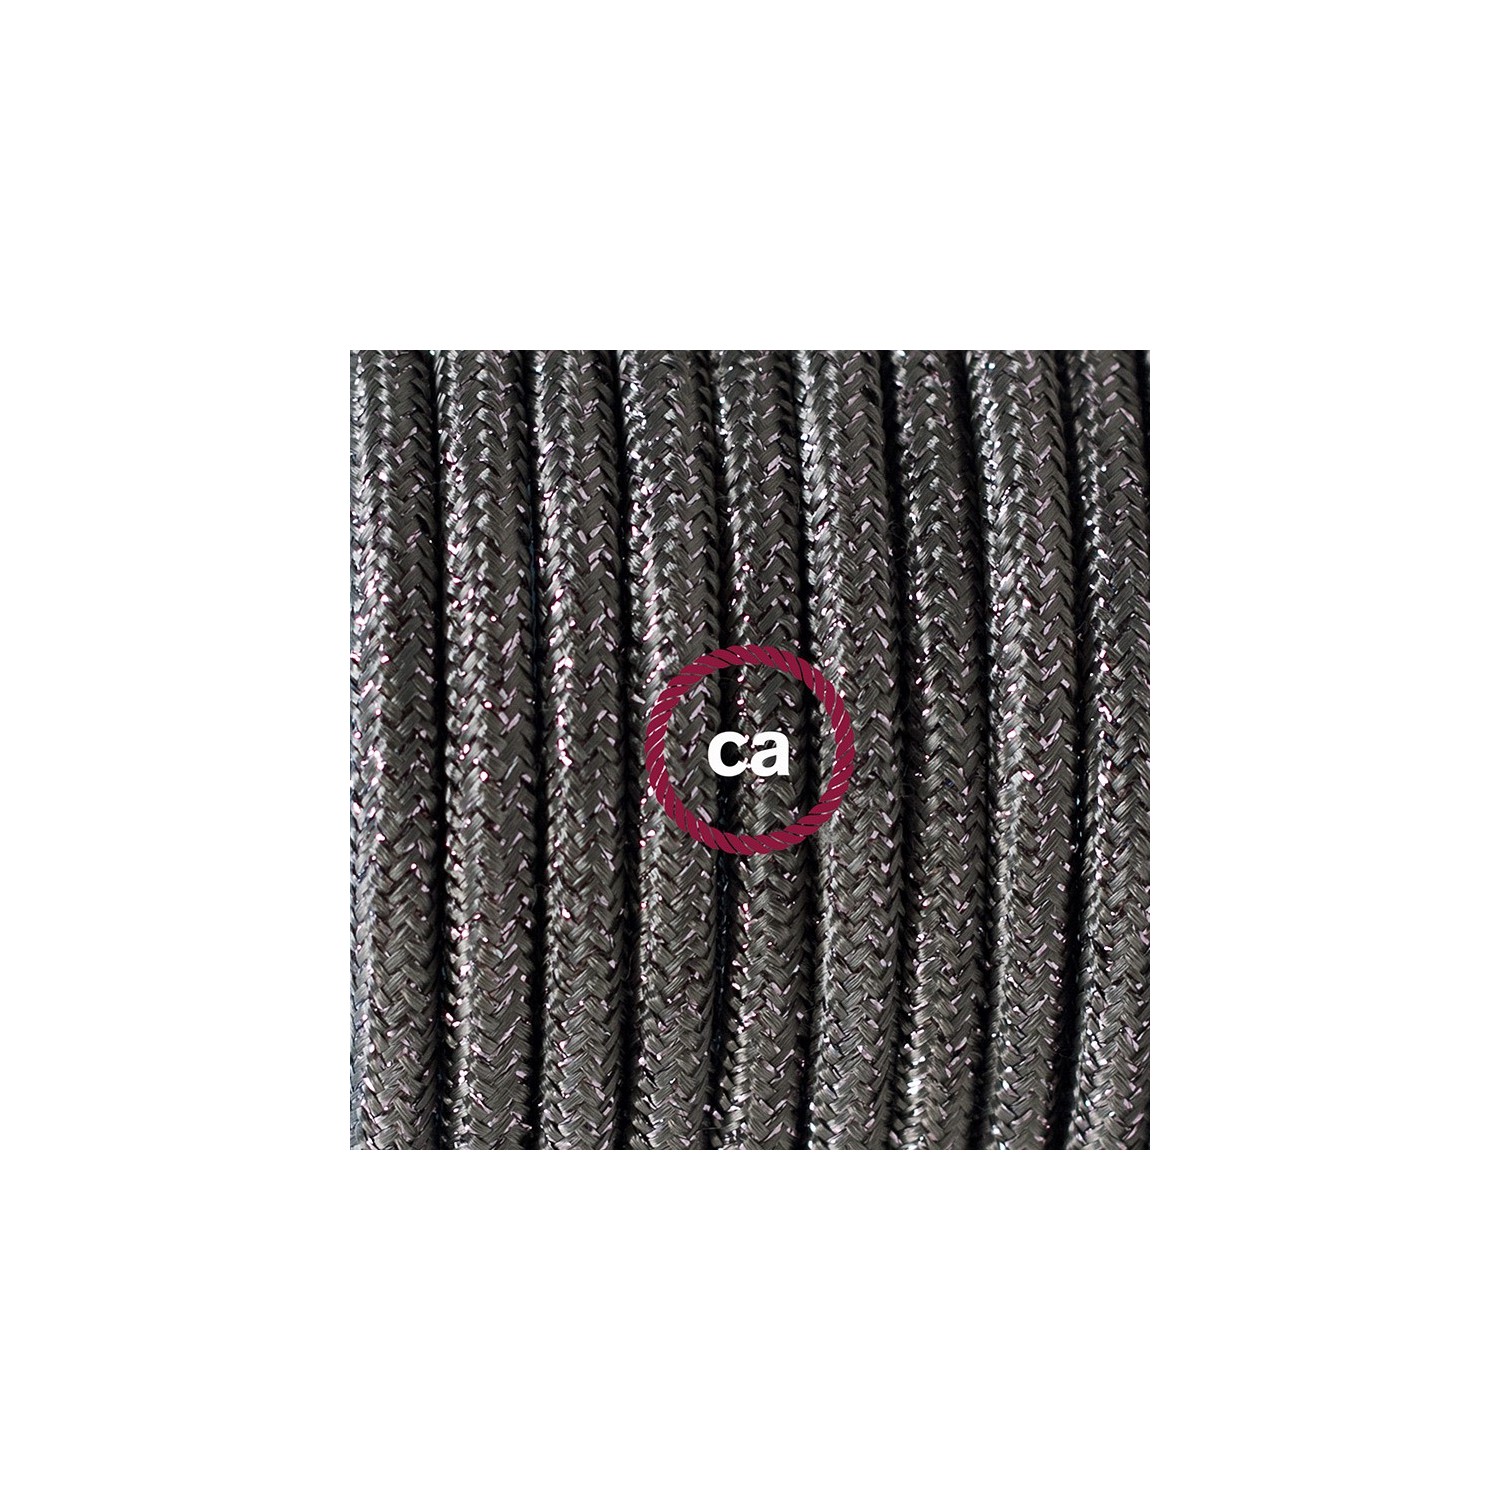 Wiring Pedestal, RL03 Sparkly Grey Rayon 3 m. Choose the colour of the switch and plug.